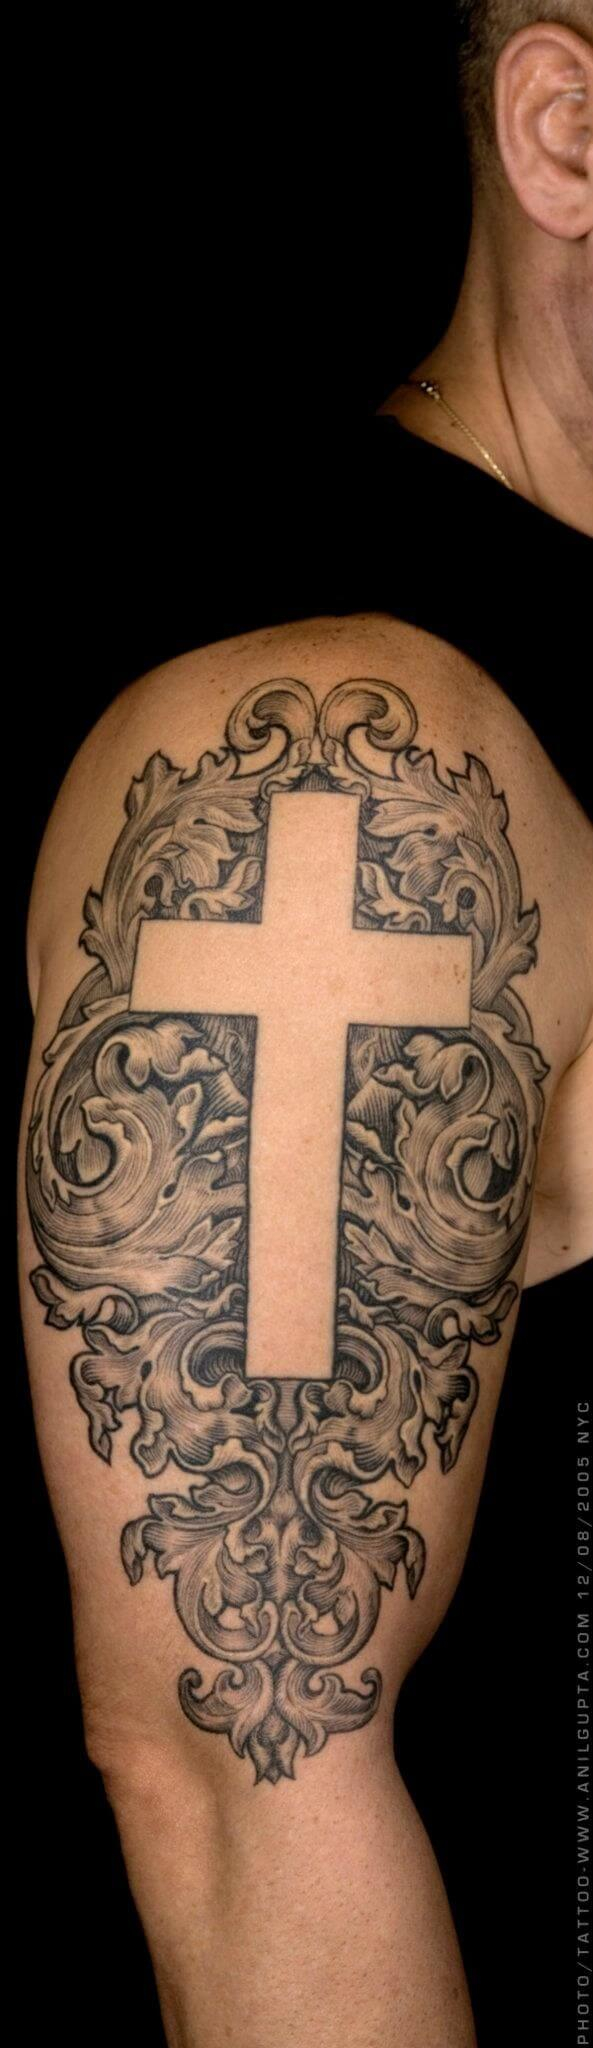 56 Best Cross Tattoos For Men Improb within dimensions 593 X 2048